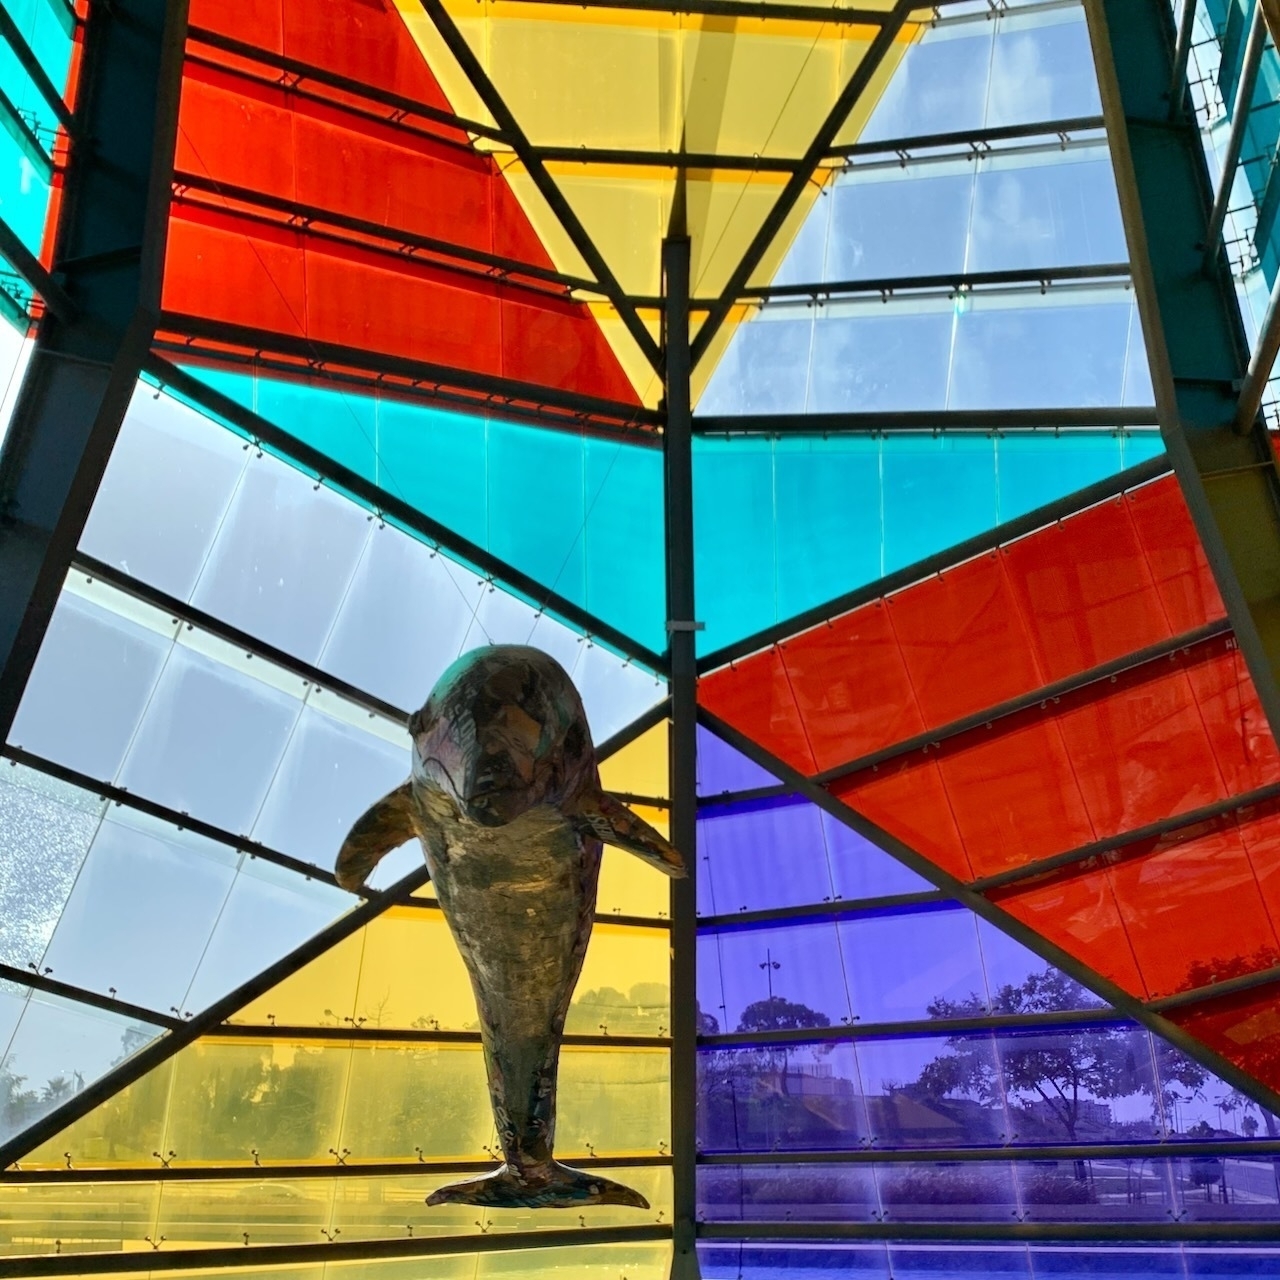 Modern geometric stained glass panels over an entry foyer at a shopping mall in Setúbal, Portugal. There is a dolphin sculpture suspended in the foreground